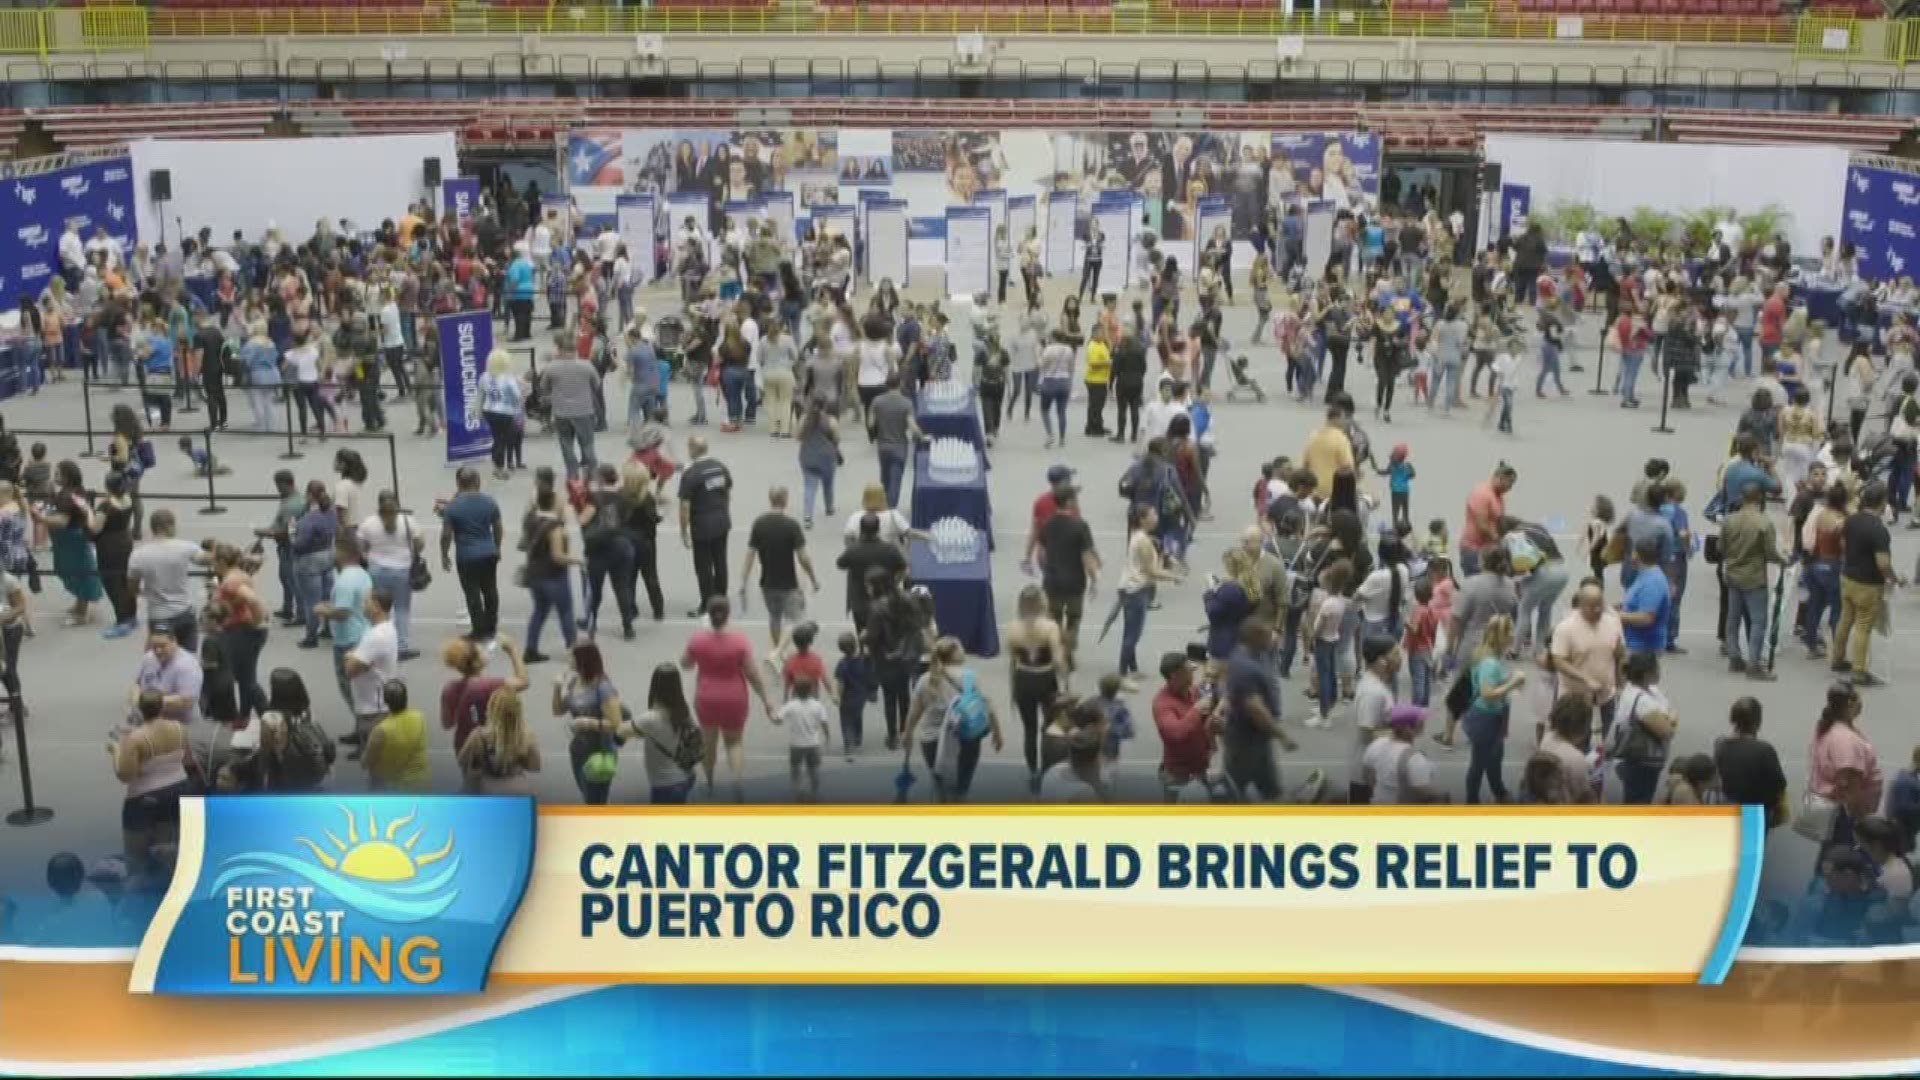 Cantor Fitzgerald and volunteers work to bring relief to Puerto Rico.